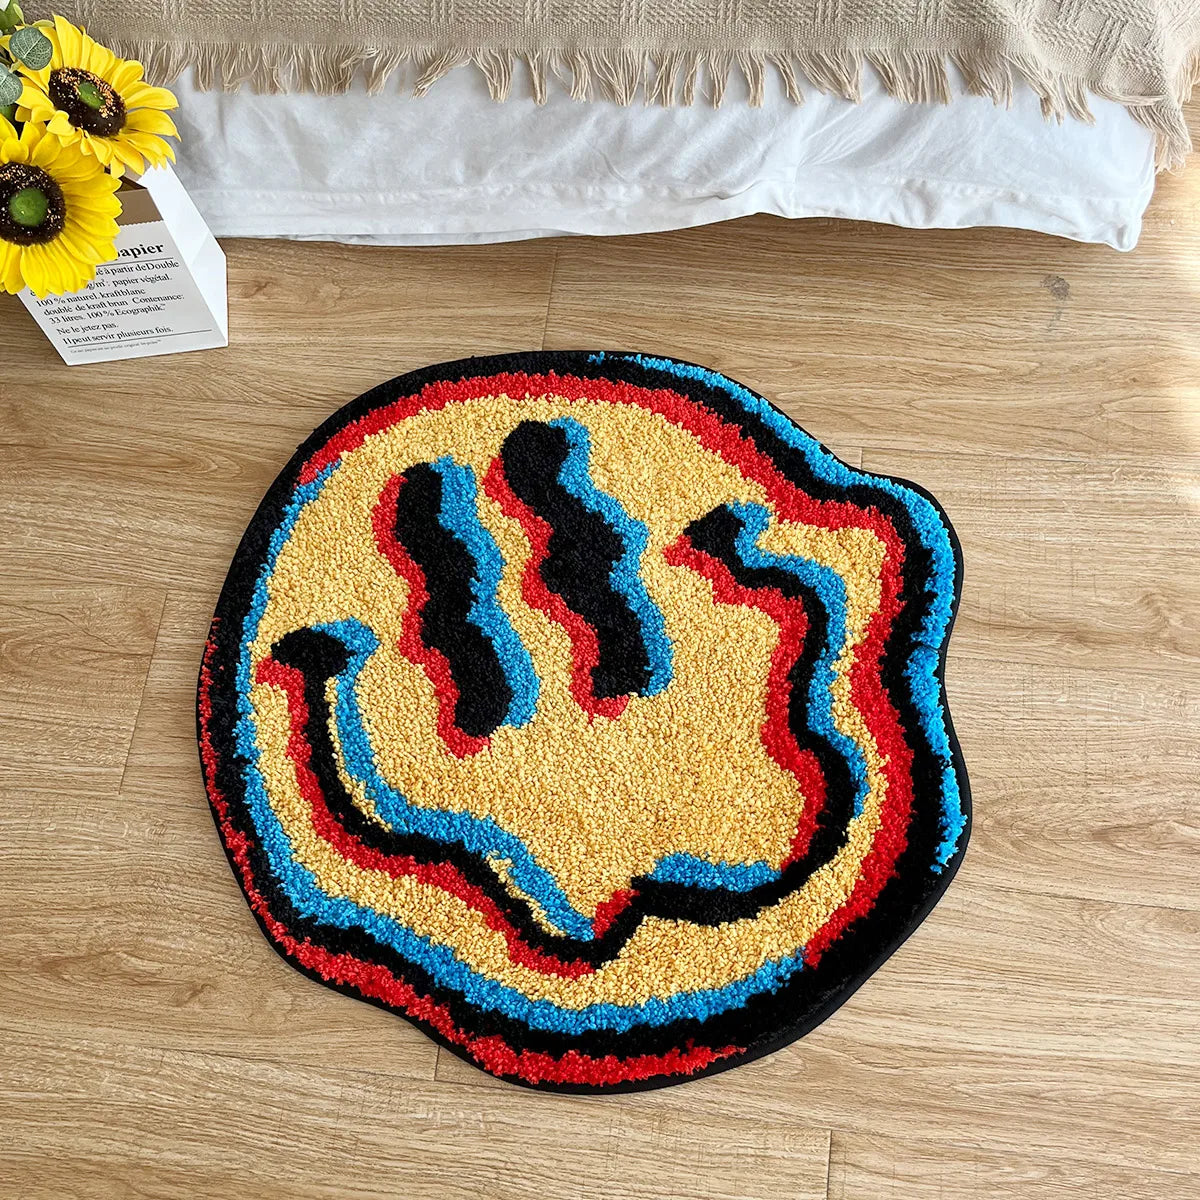 LAKEA Trippy Smiling Face Rug Handmade Rug Tufted Rug Gift for Friend Rugs for Bedroom Geek Gift Home Decor Carpet